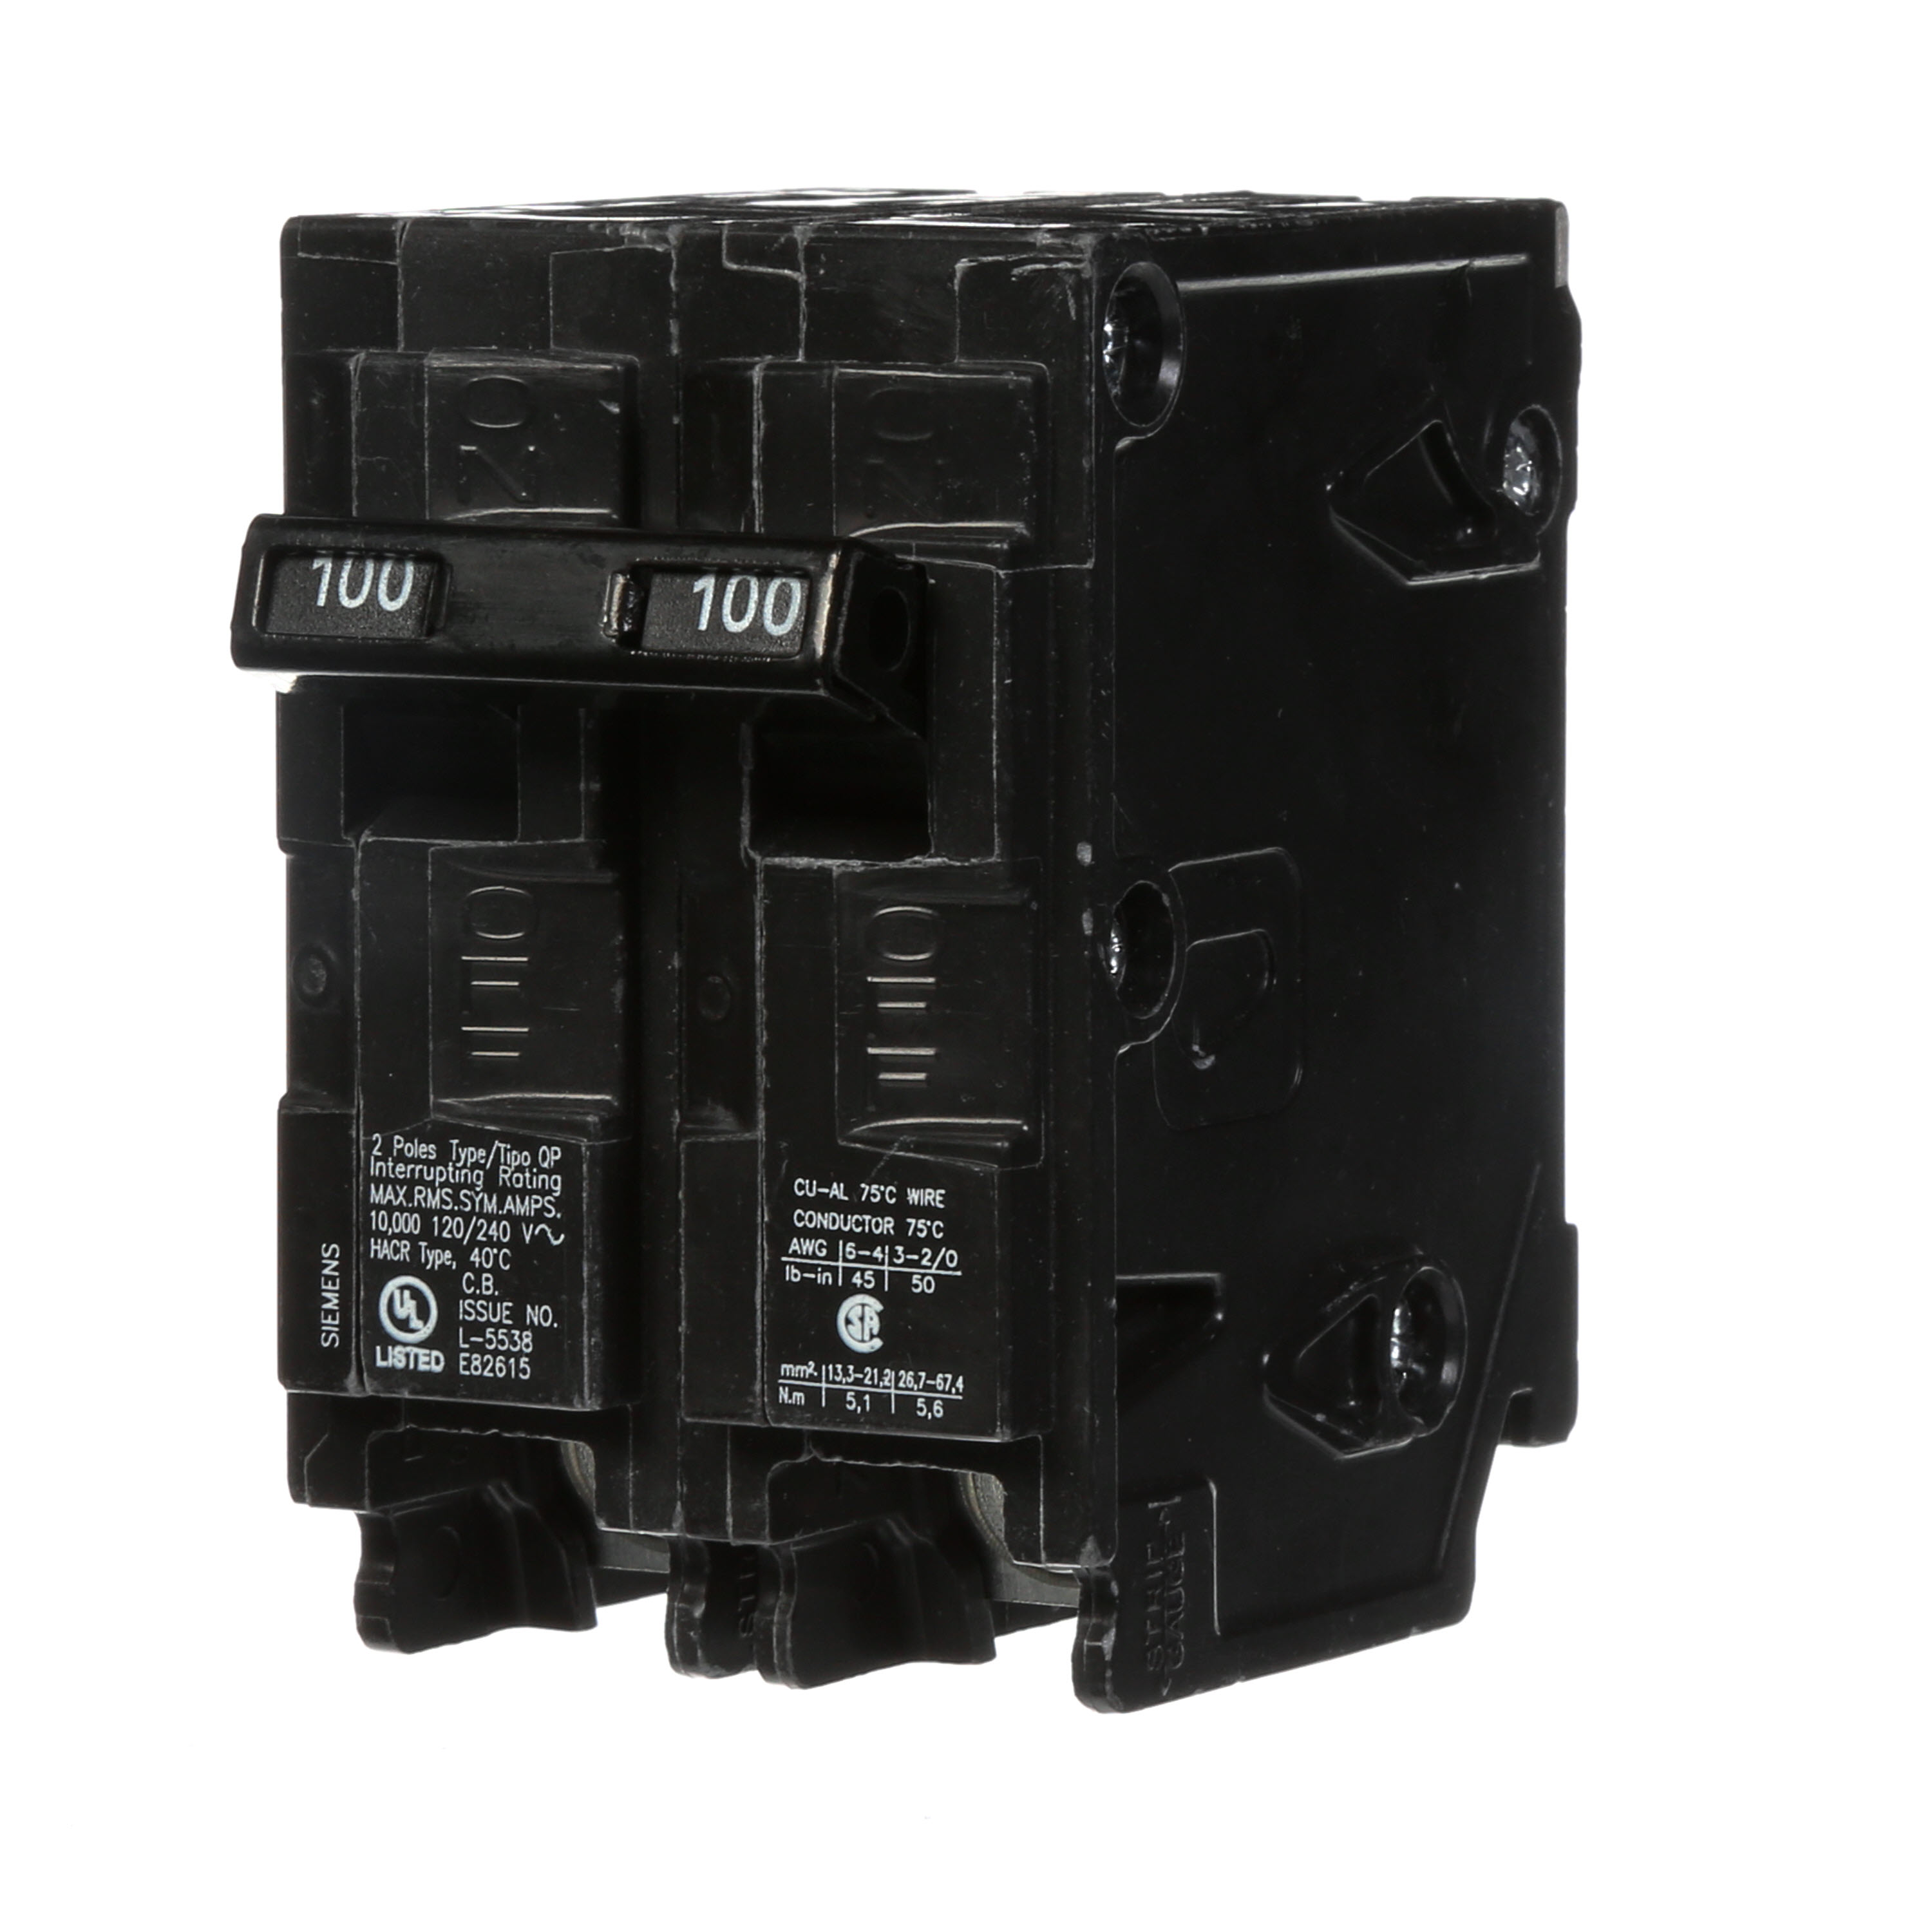 Siemens Low Voltage Residential Circuit Breakers Miniature Thermal Mag Circuit Breakers - Type QP/MP, 2-Pole, 120/240VAC are Circuit Protection Load Center Mains, Feeders, and Miniature Circuit Breakers. Type QP/MP Application Electrical Distribution Standard UL 489 Voltage Rating 120/240V Amperage Rating 100A Trip Range Thermal Magnetic Interrupt Rating 10 AIC Number Of Poles 2P